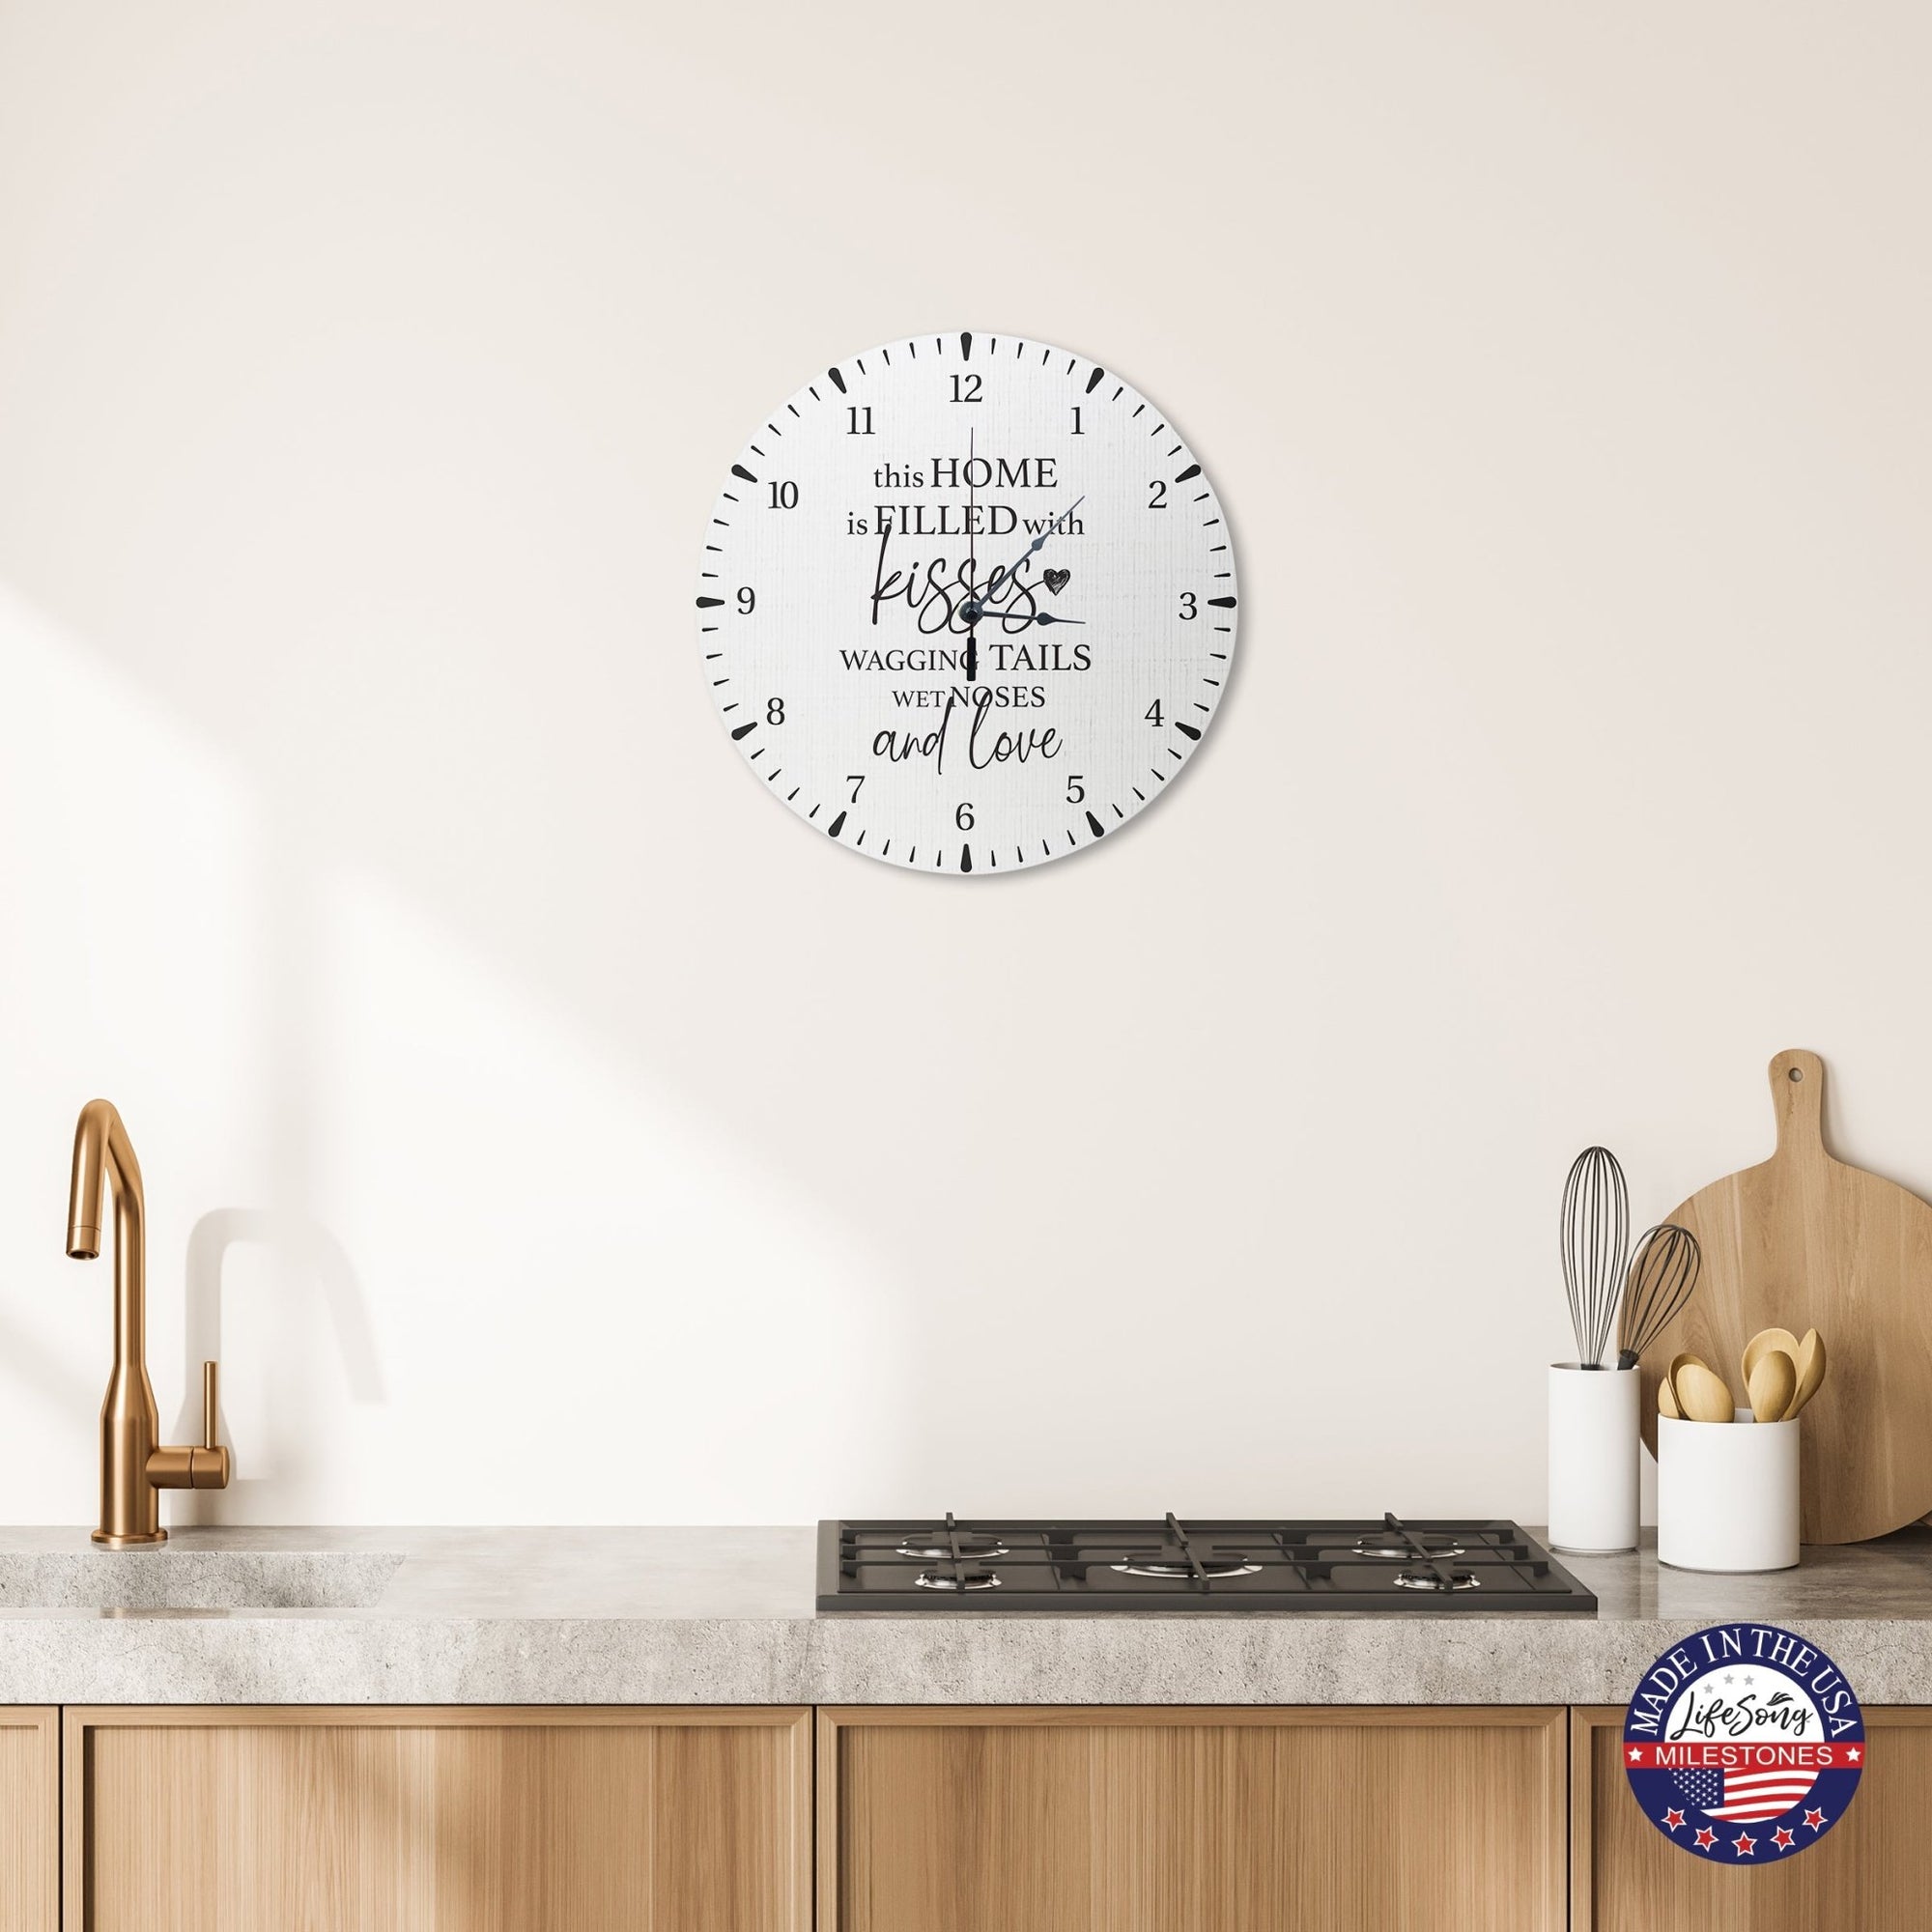 Minimalist Roman Numeral Wooden Clock For Walls Or Countertop Display For Pet Owners - This Home Is Filled - LifeSong Milestones